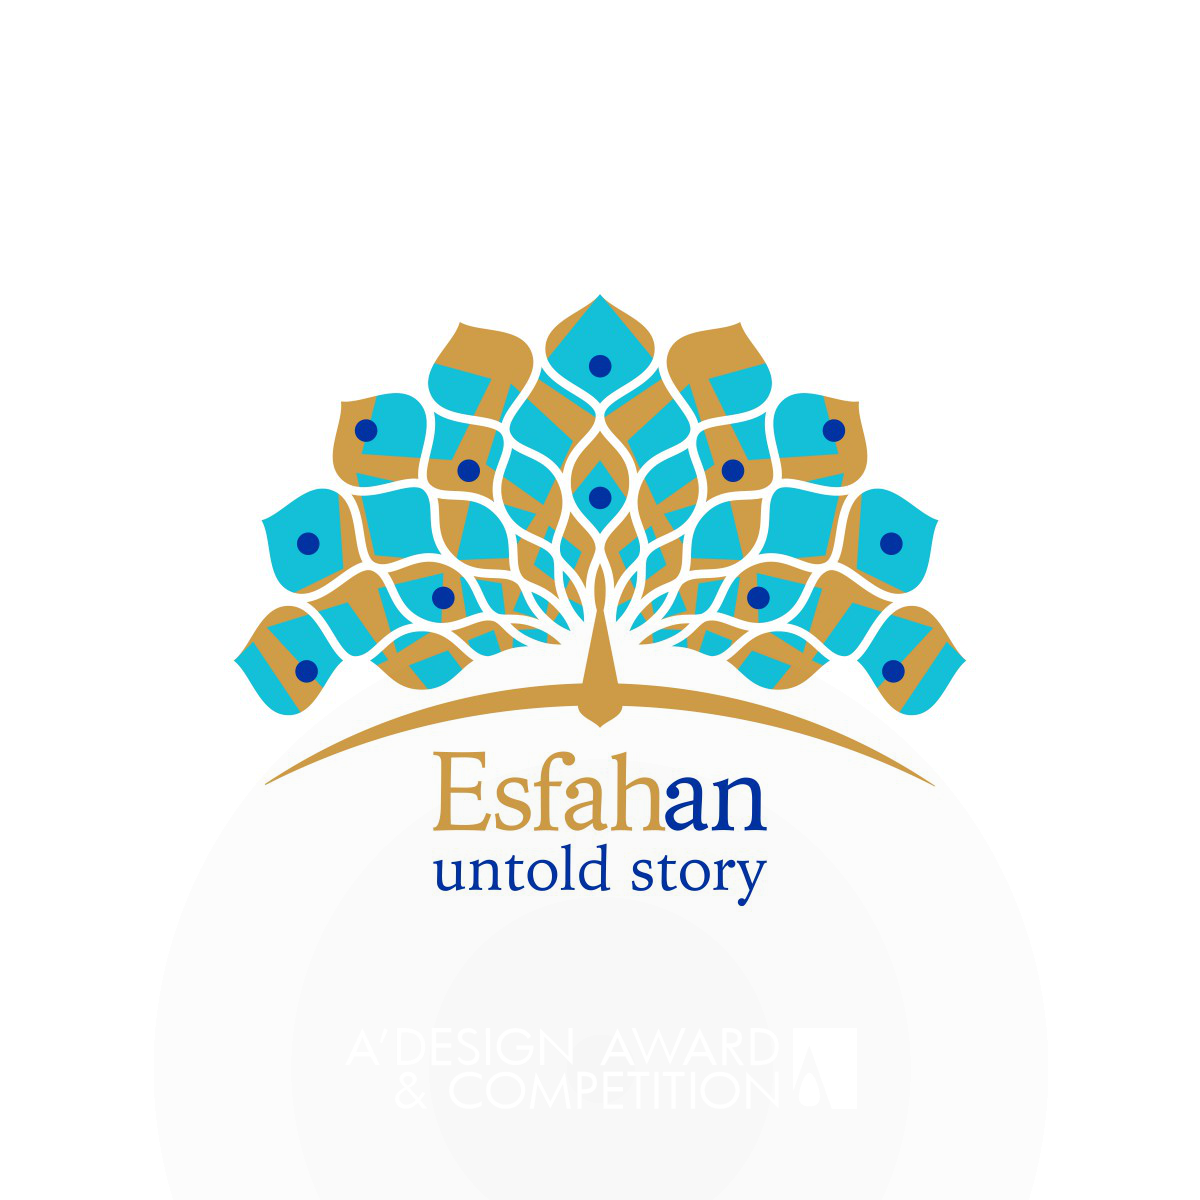 Story of Esfahan